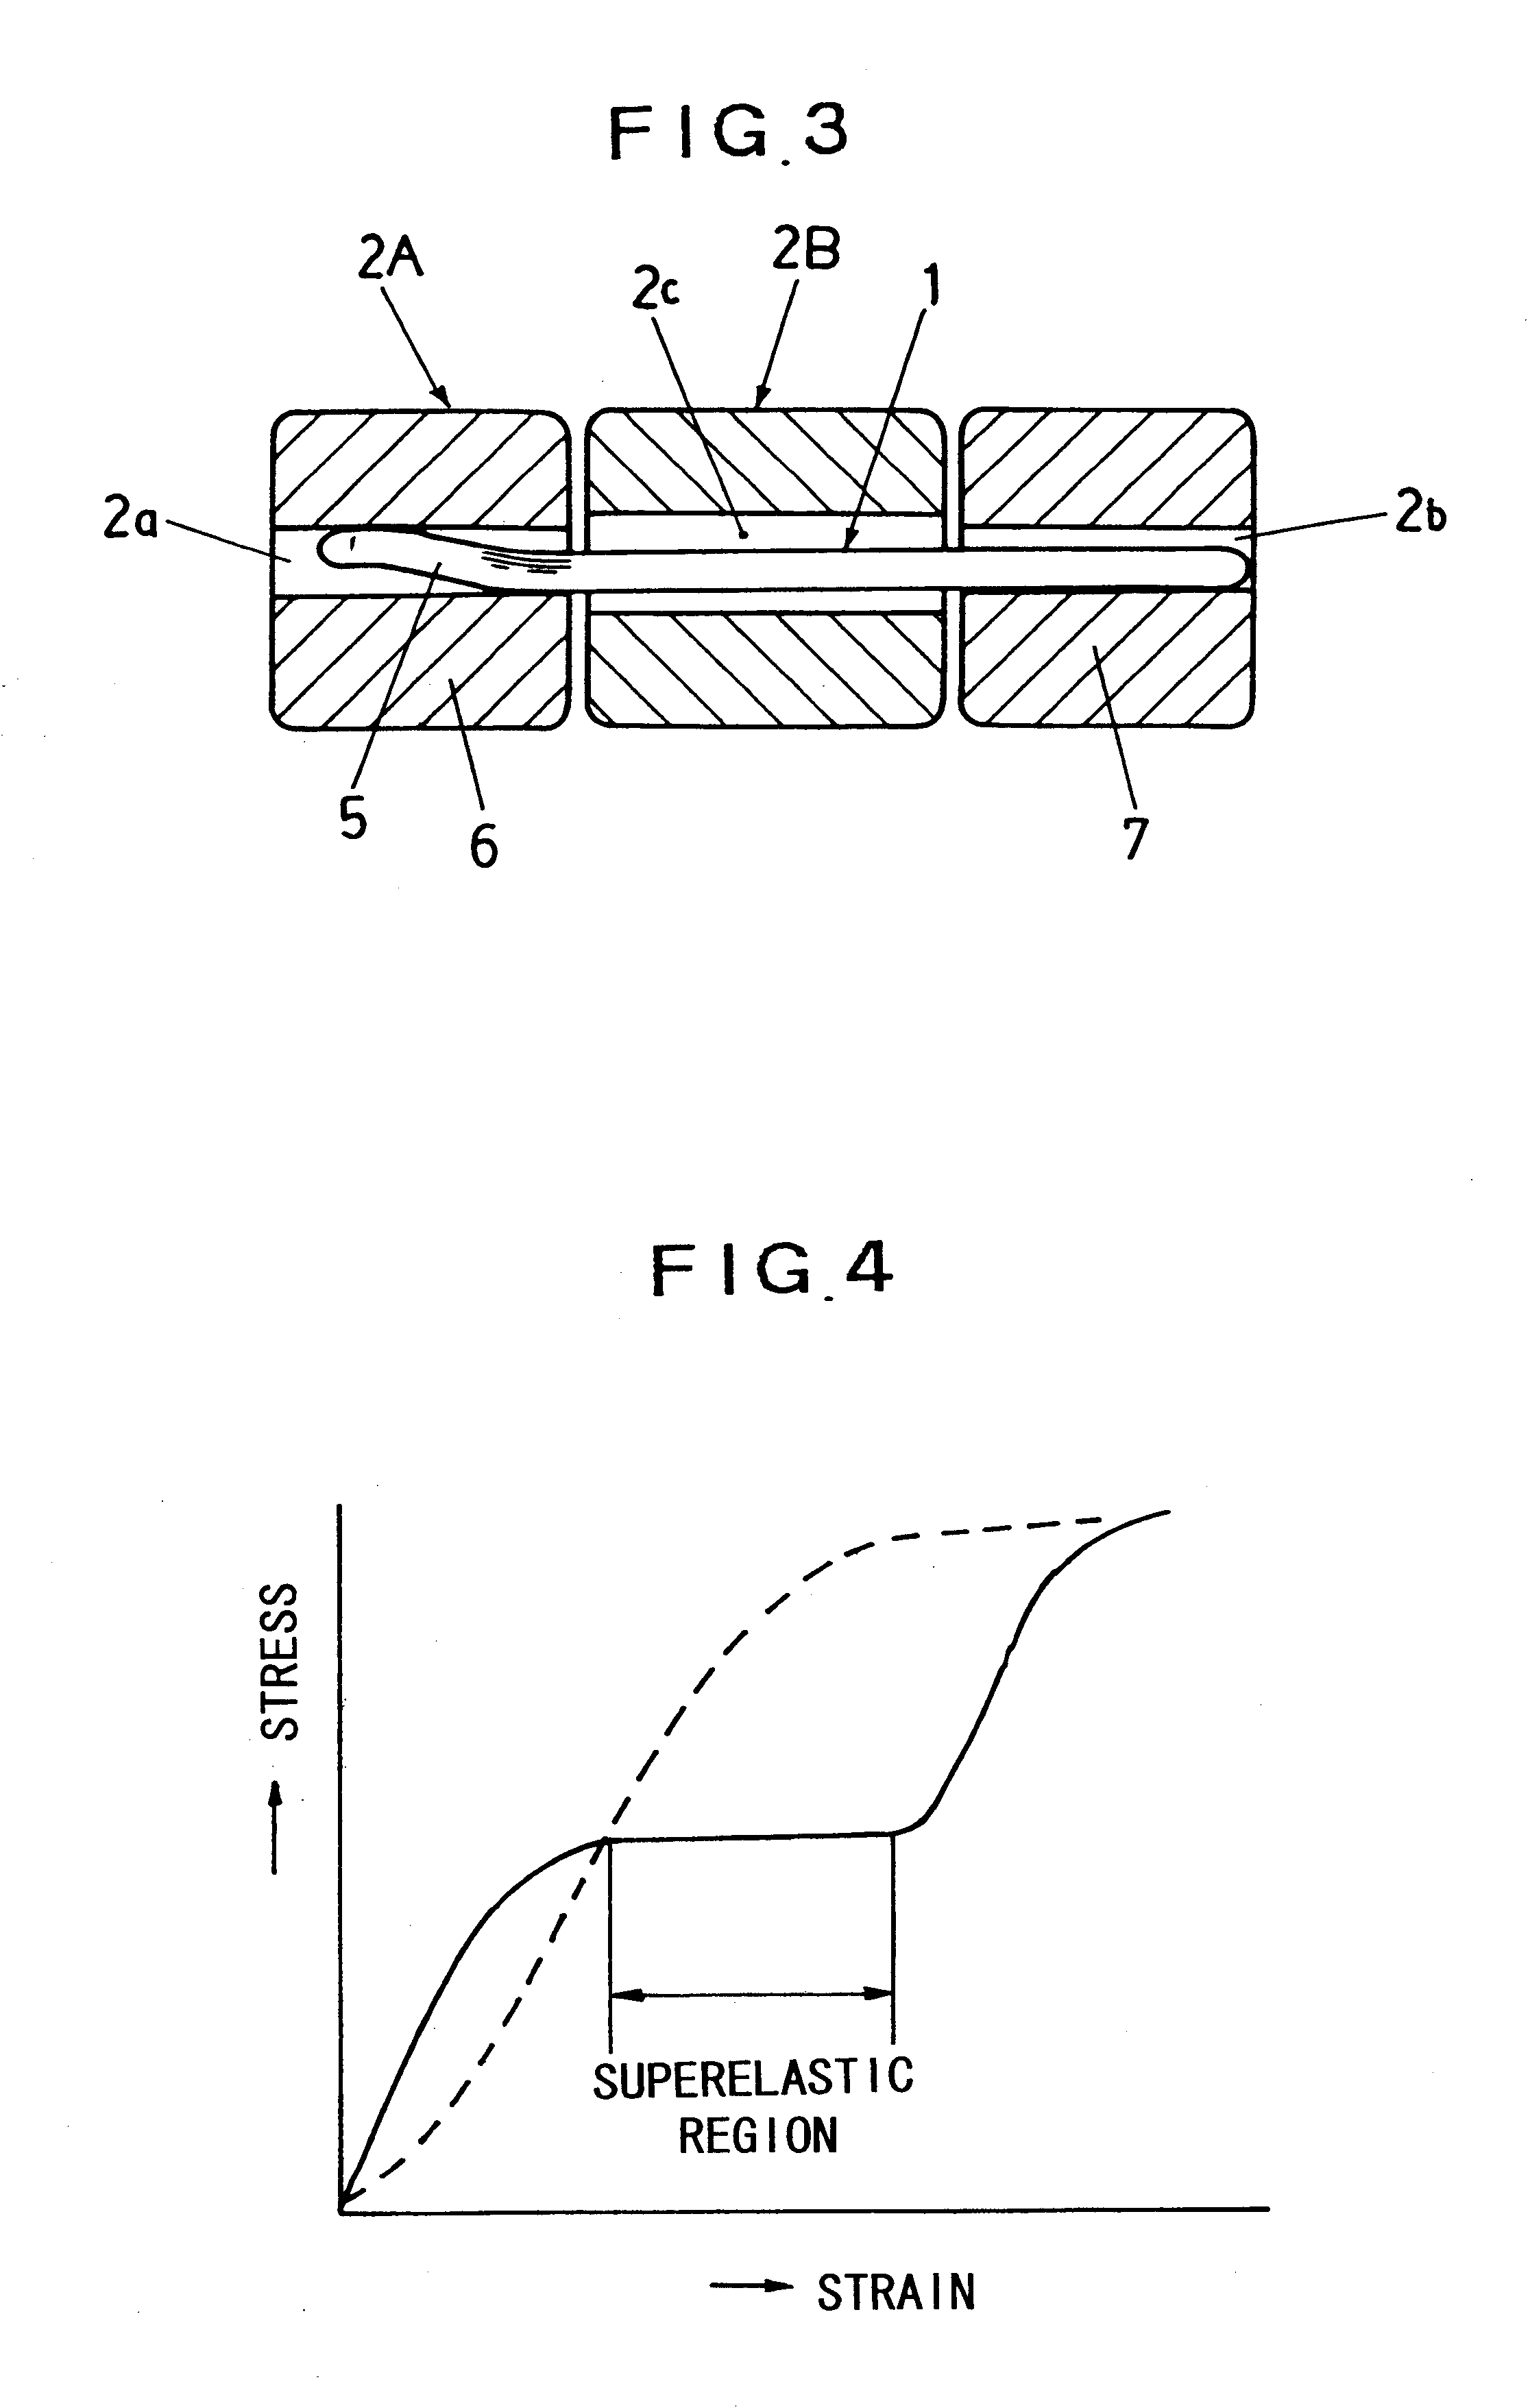 Wrist watch band adjust pin, method of manufacturing the pin, and wrist watch band connection structure